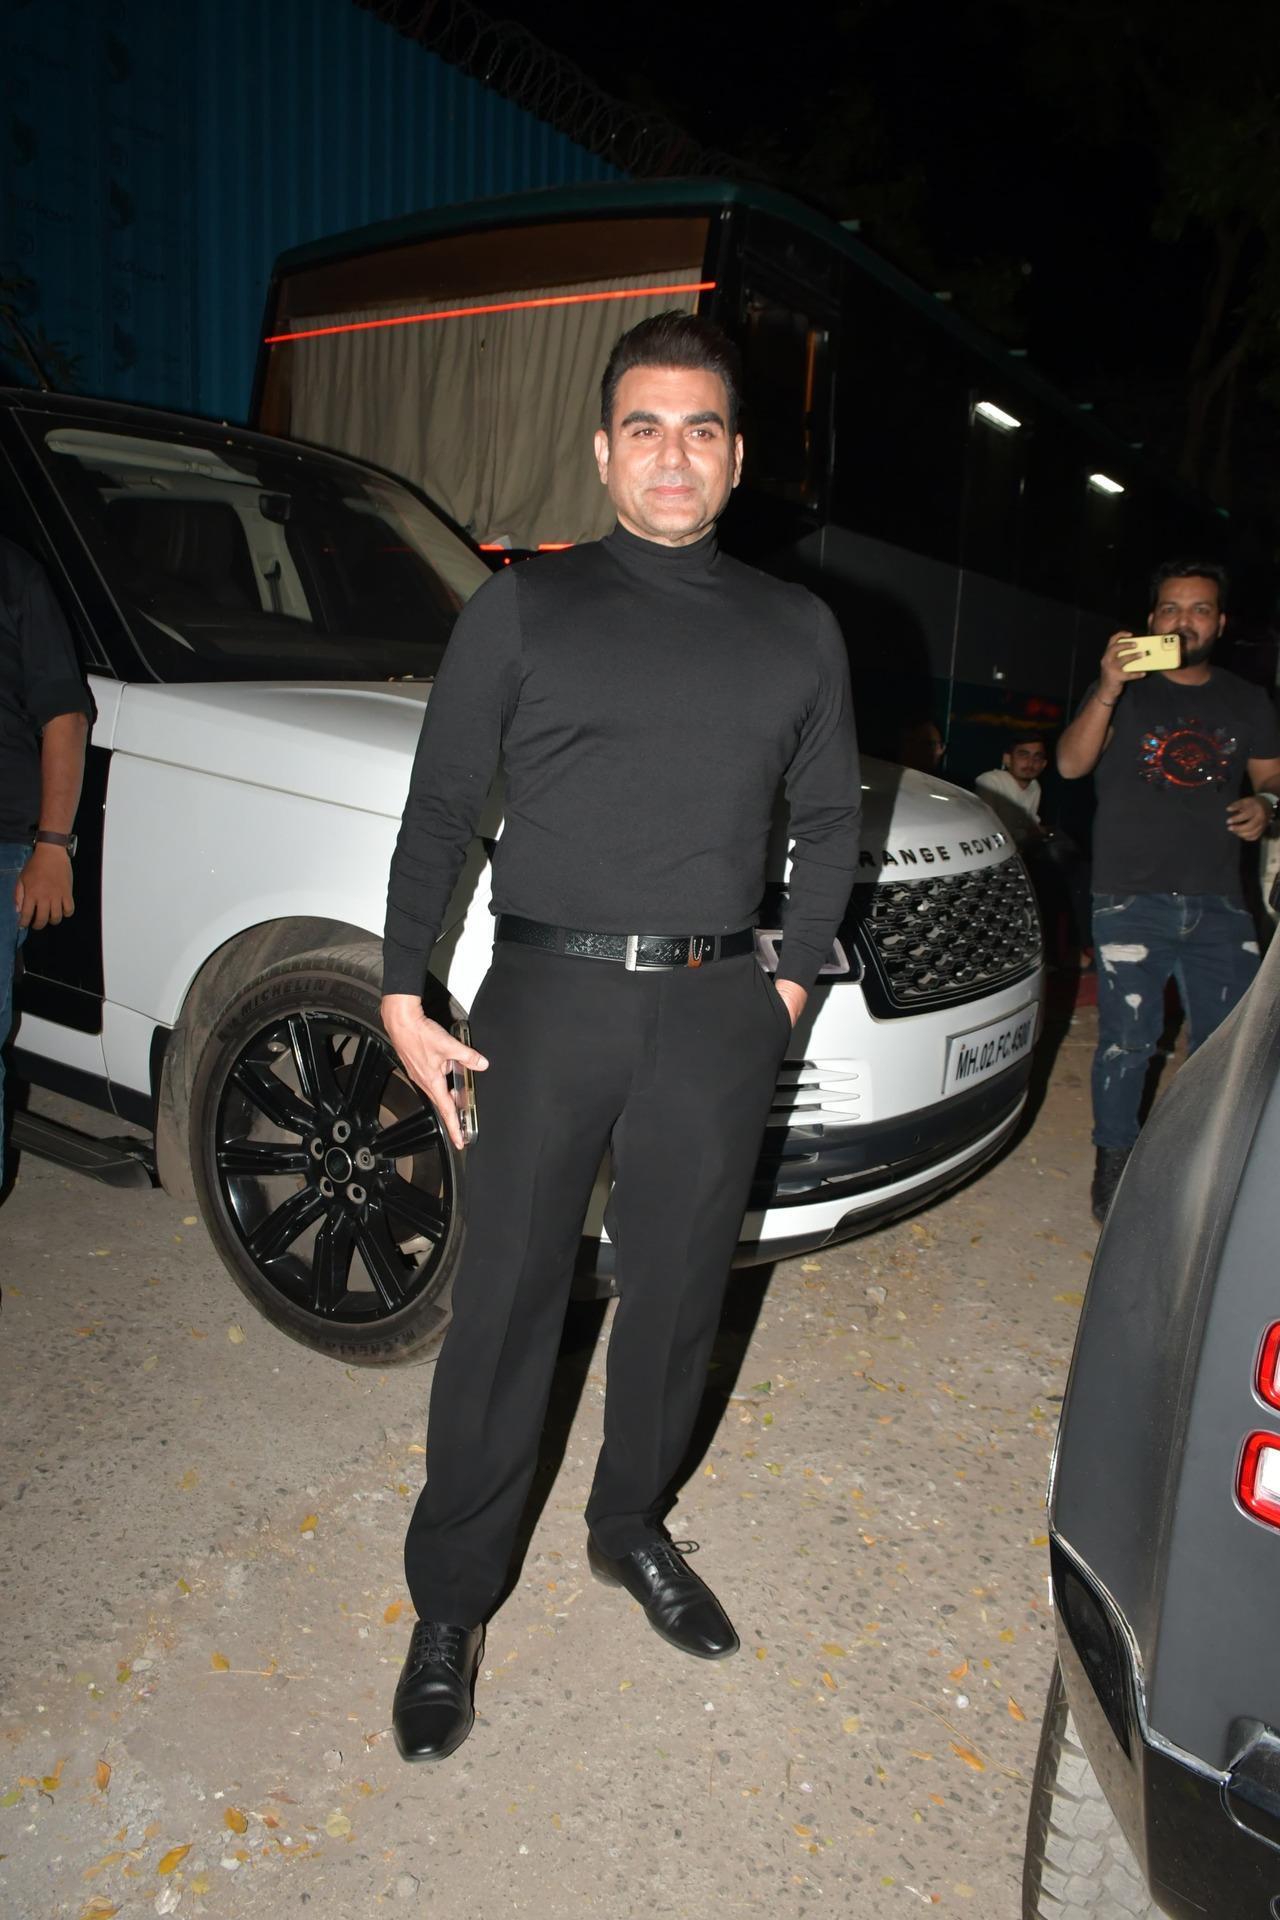 Arbaaz Khan who hosted a couple of fun segments on the show was also present for the grand finale